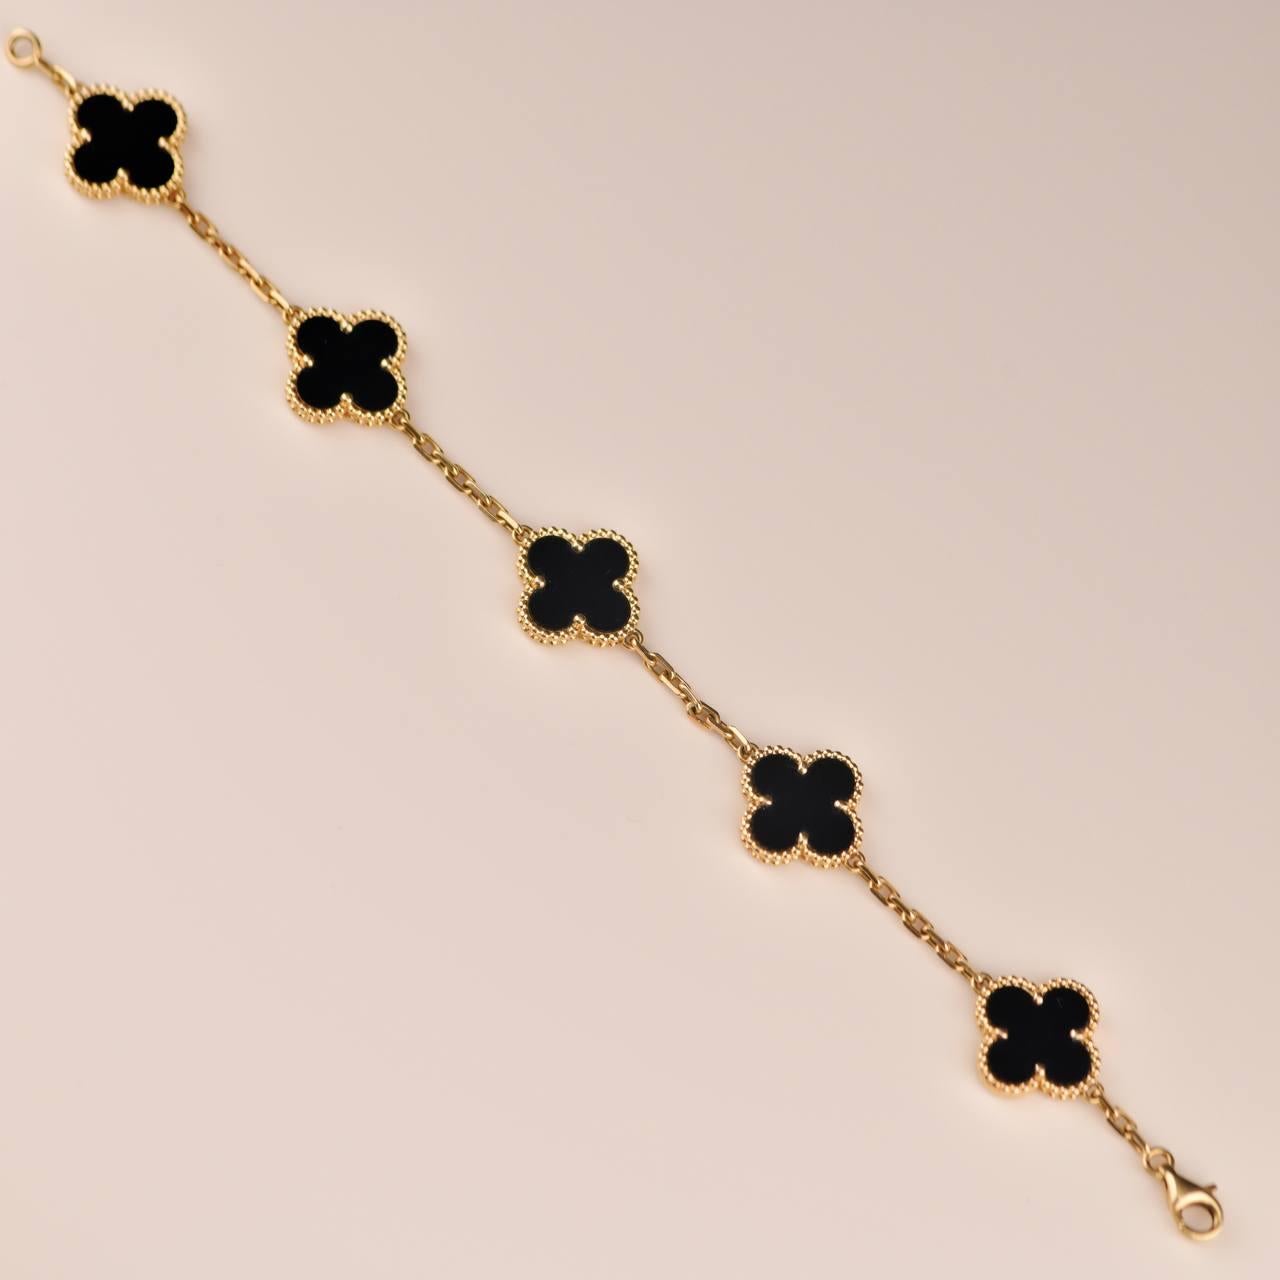 An 18k yellow gold bracelet from the Vintage Alhambra collection by Van Cleef and Arpels. The bracelet is made up of 5 iconic clover motifs, each set with a beaded edge and a black onyx inlay, set throughout the length of the chain.

SKU